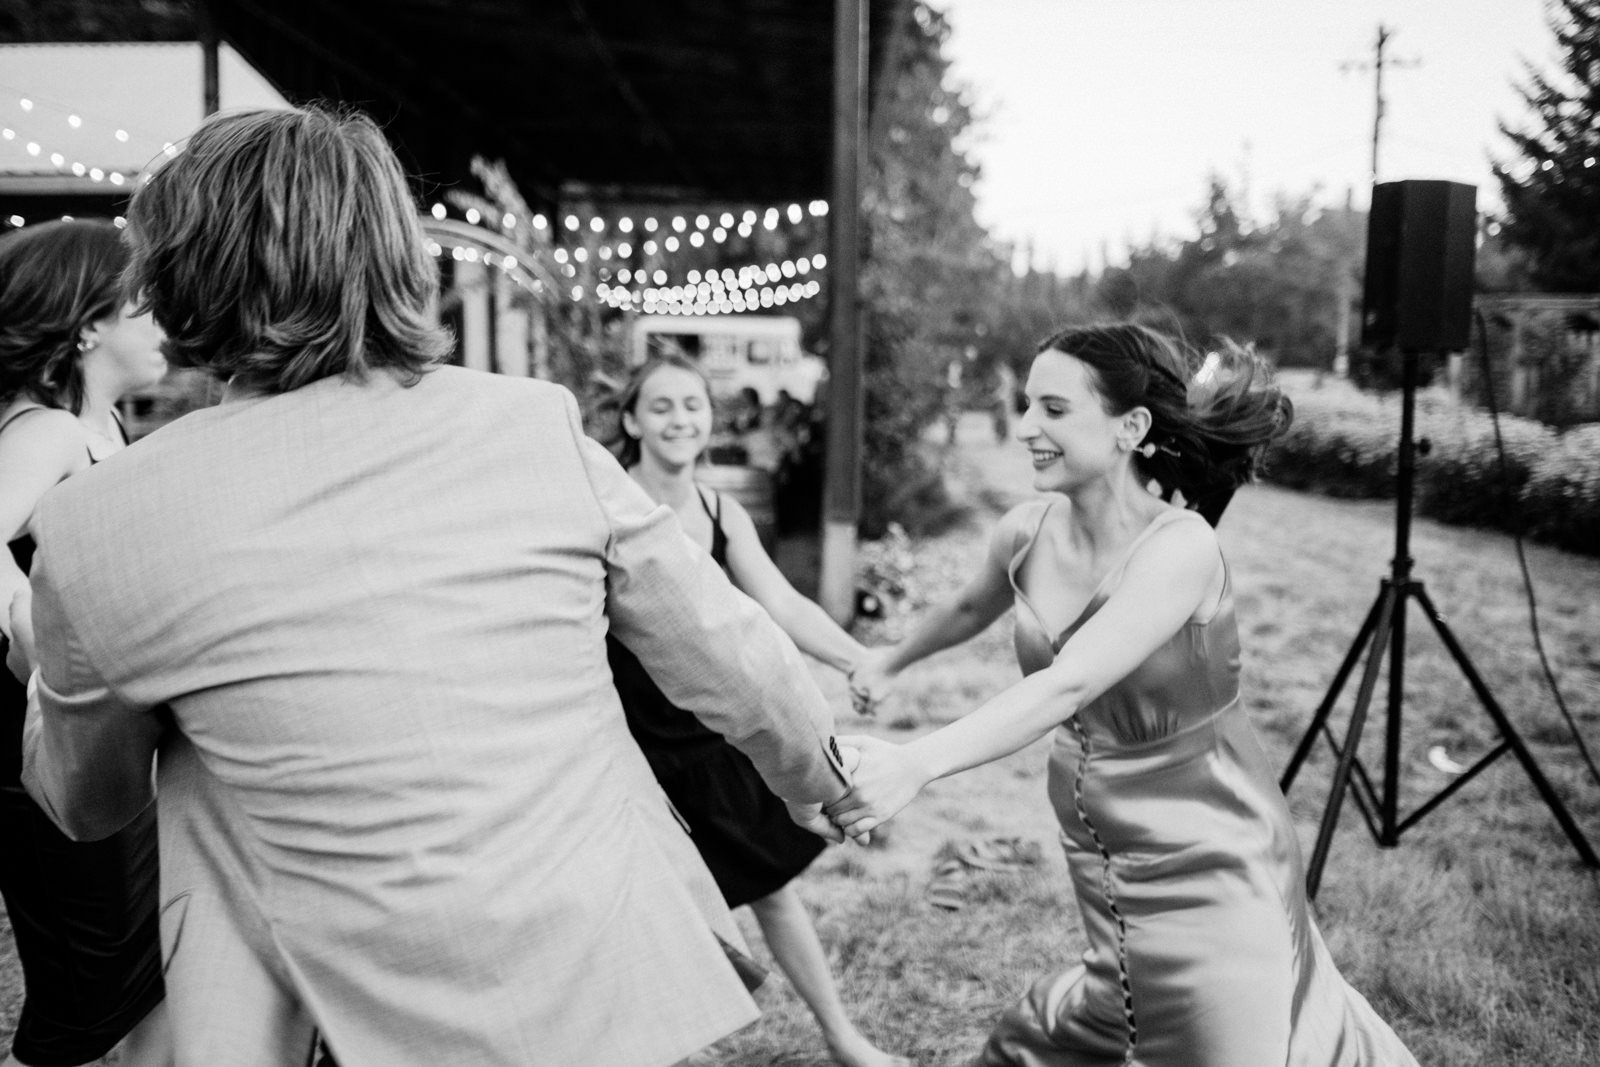  Bridesmaid twirls with guests in black and white candid moment 